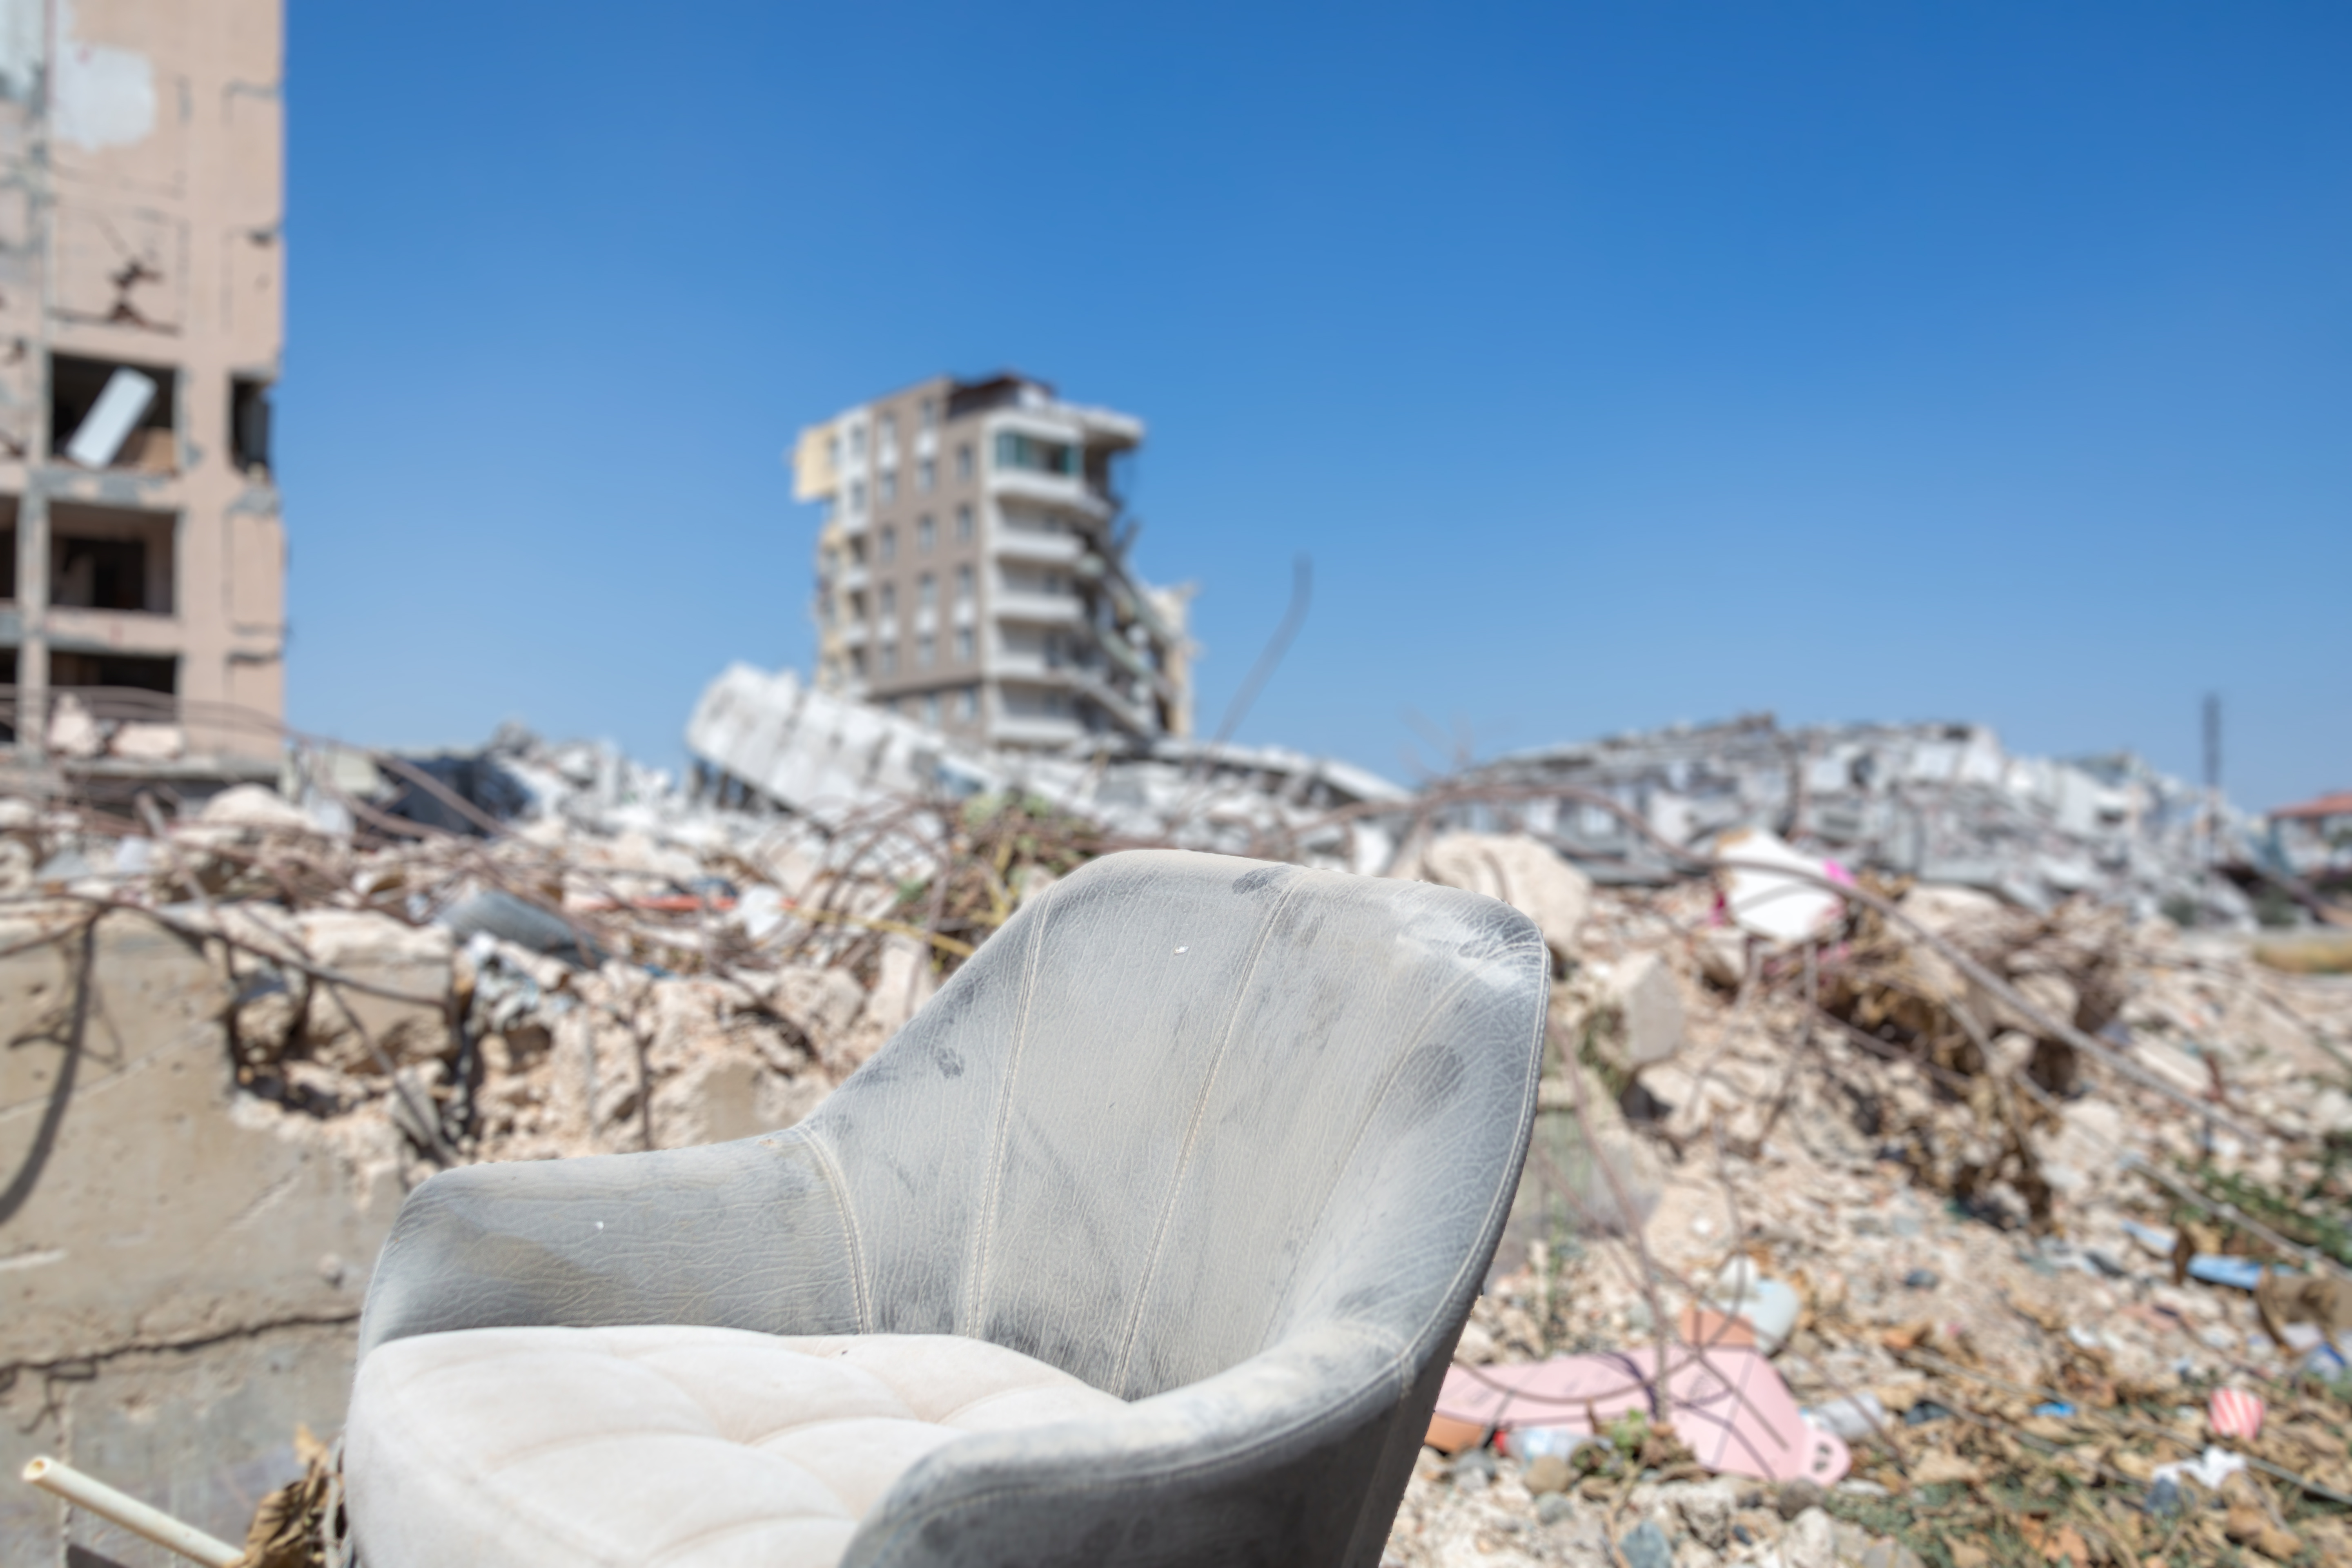 A dusty armchair sitting in front of the collapsed buildings with earthquake debris on the background.